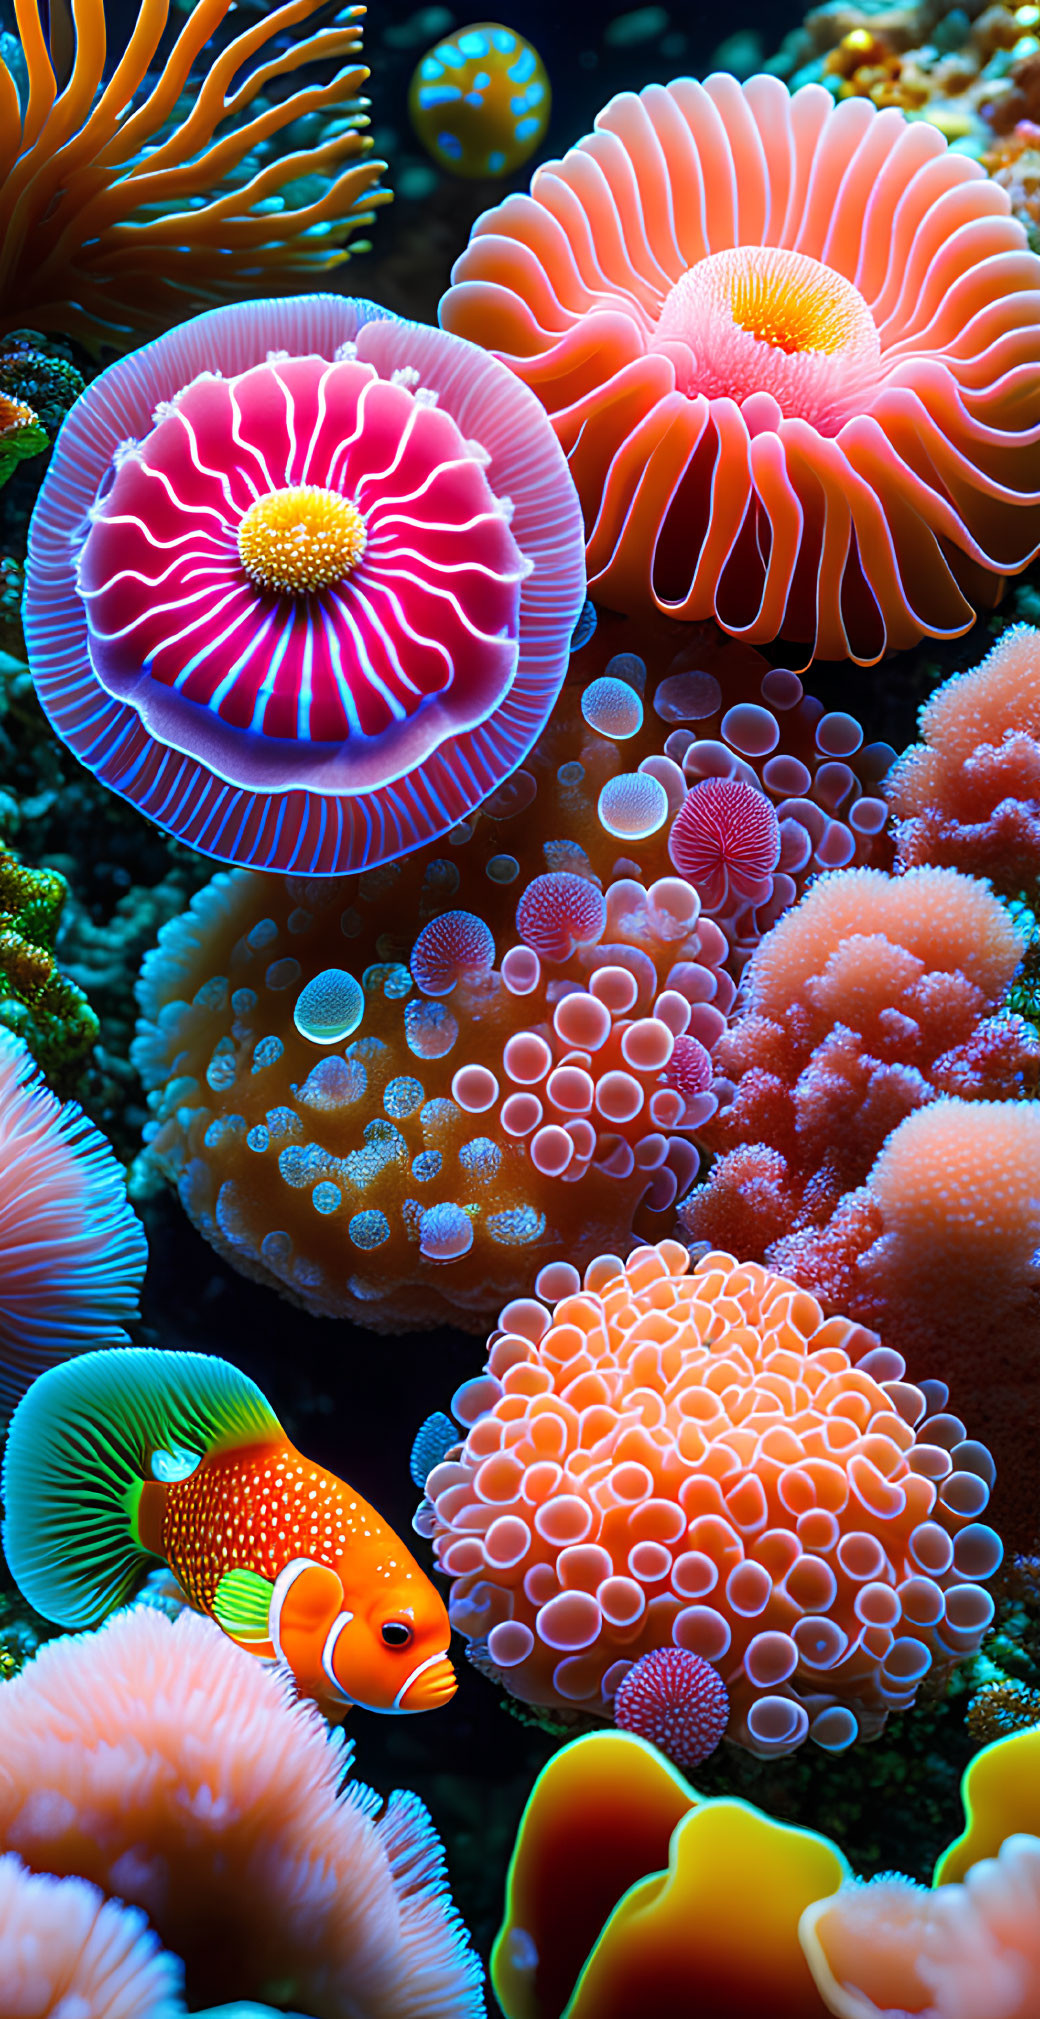 Colorful Underwater Scene with Sea Anemones and Clownfish